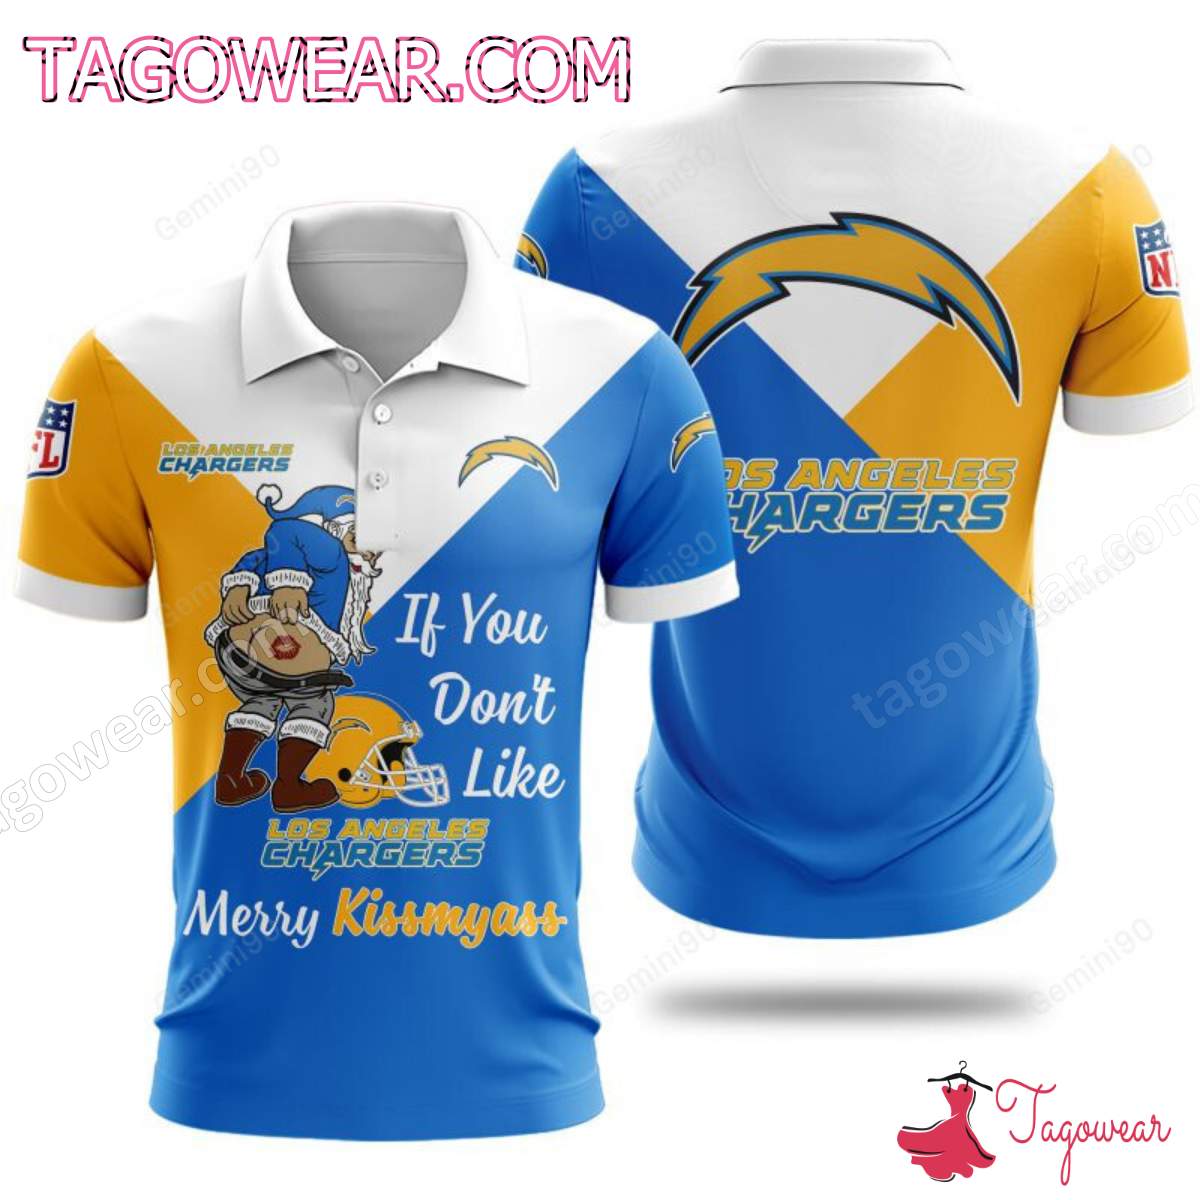 If You Don't Like Los Angeles Chargers Merry Kissmyass T-shirt, Polo, Hoodie